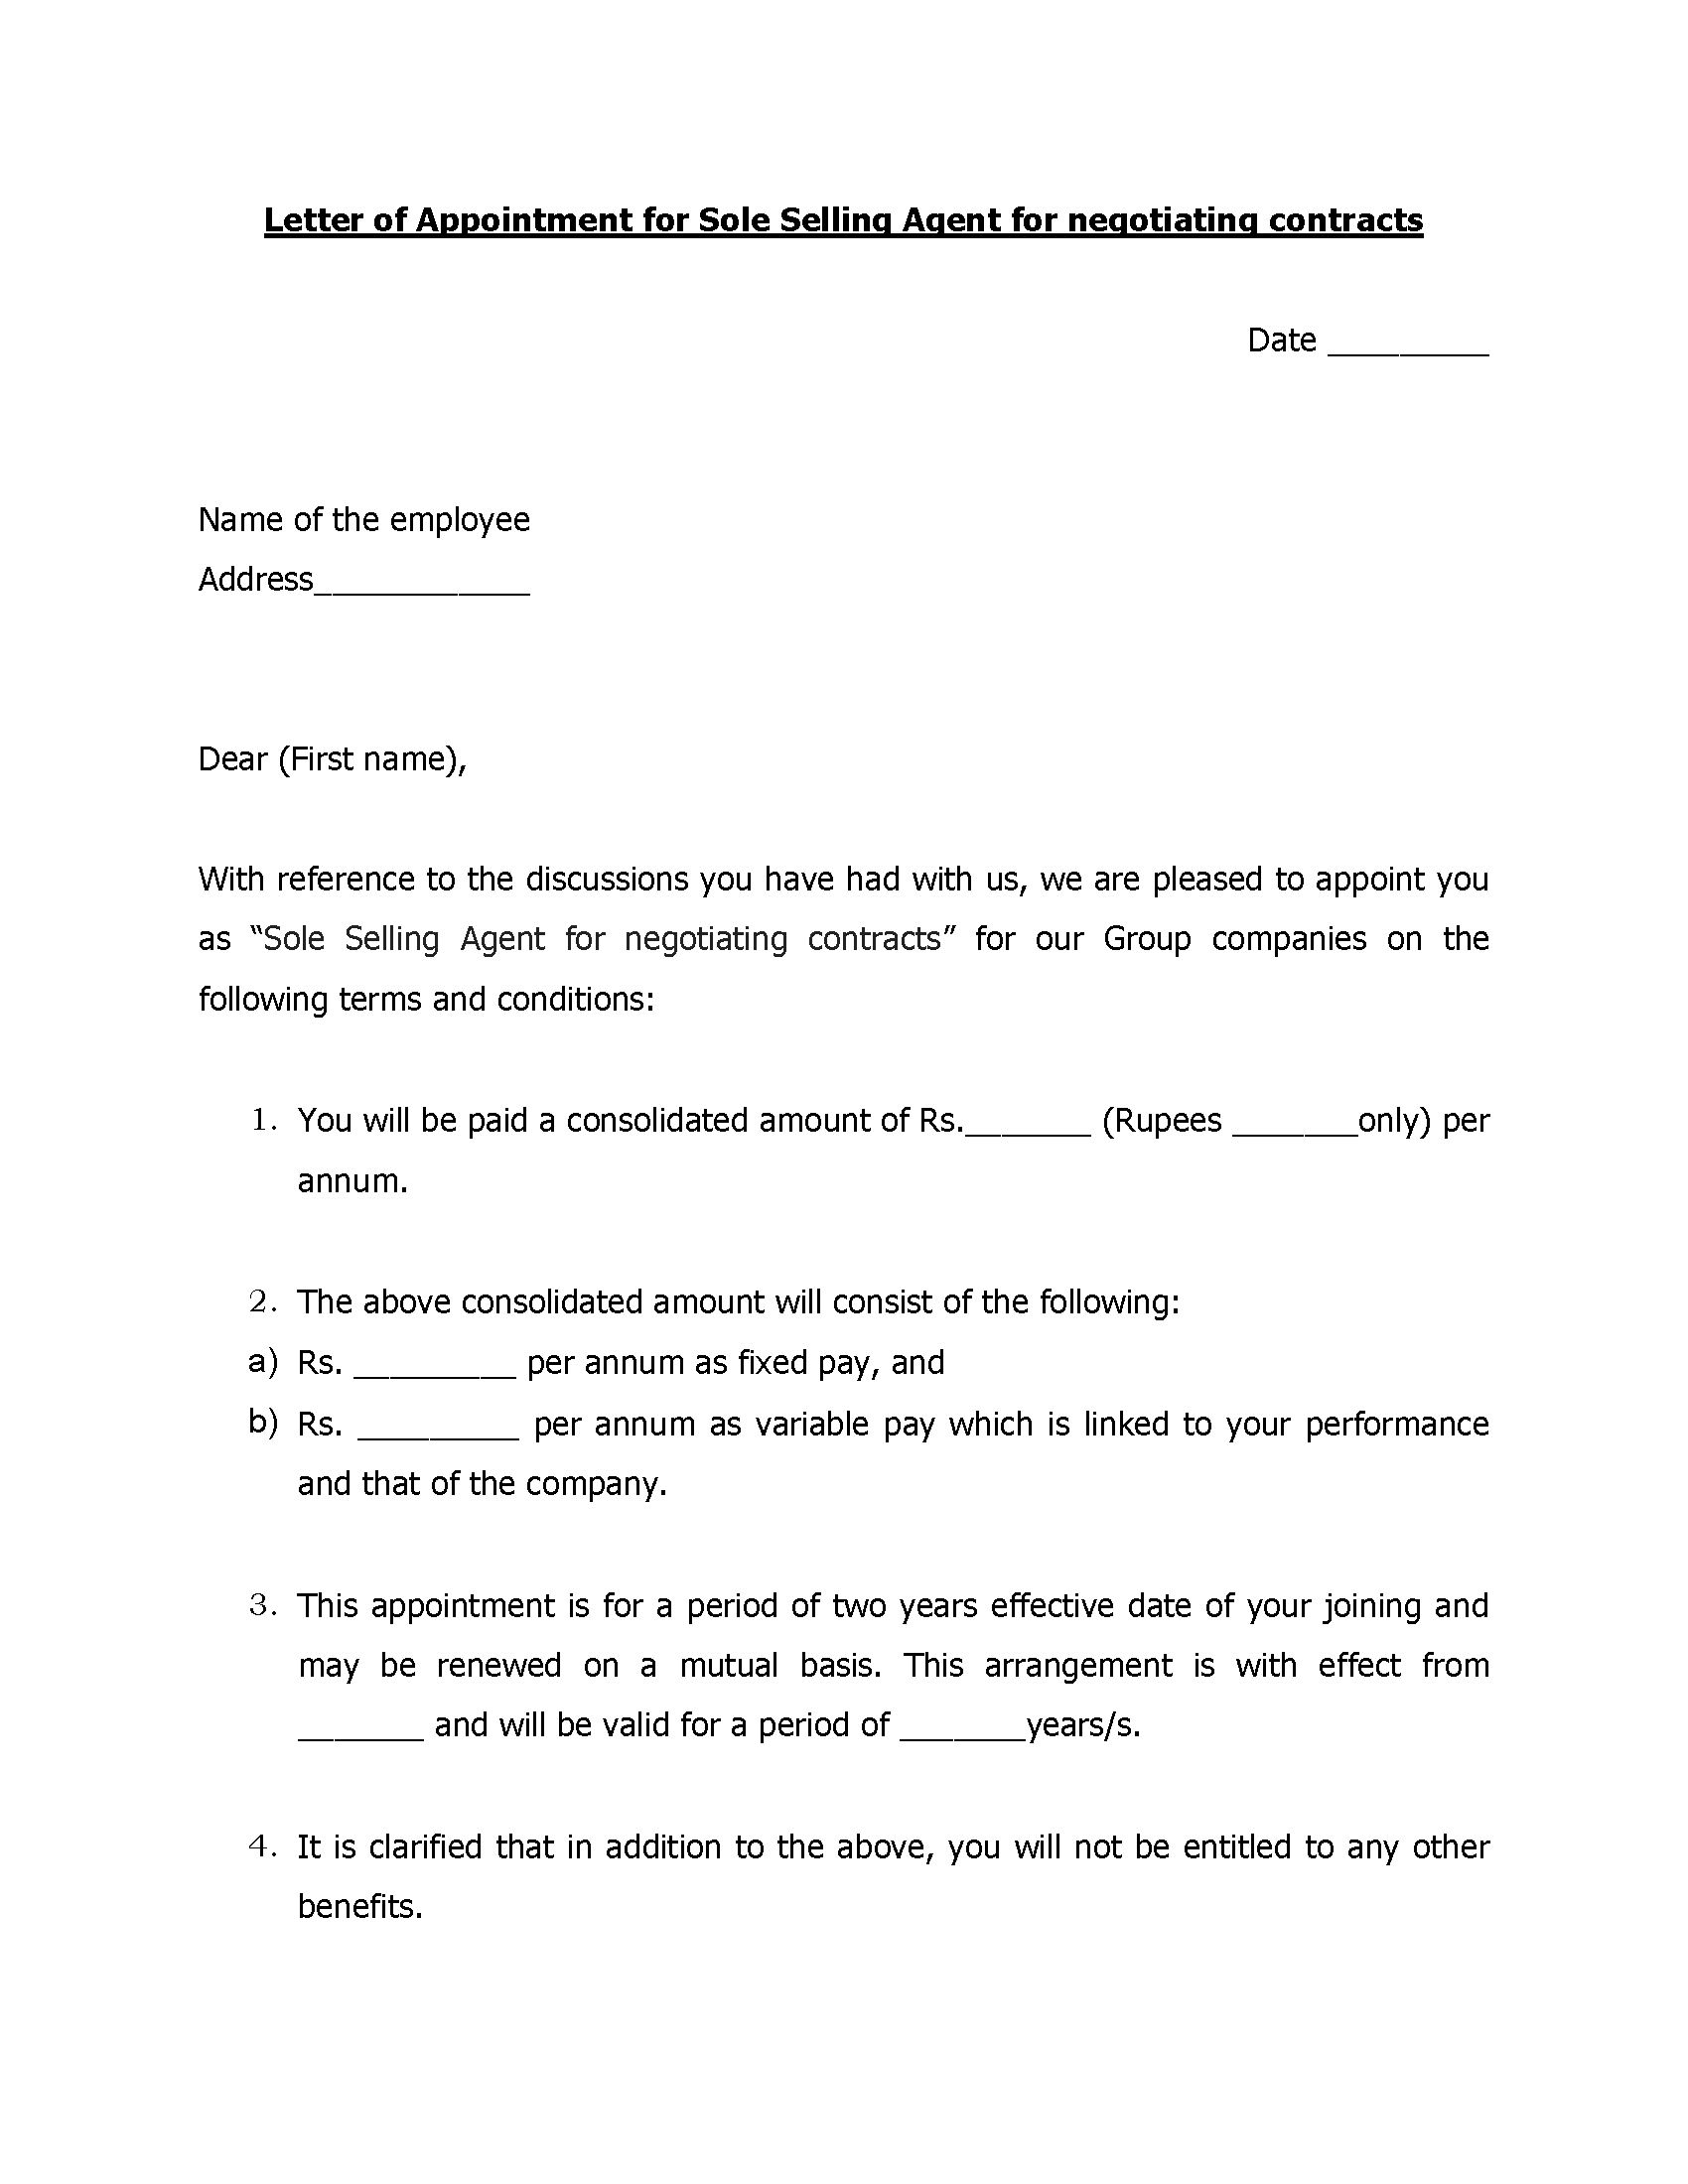 Letter Of Appointment For Sole Selling Agent For Negotiating Contracts